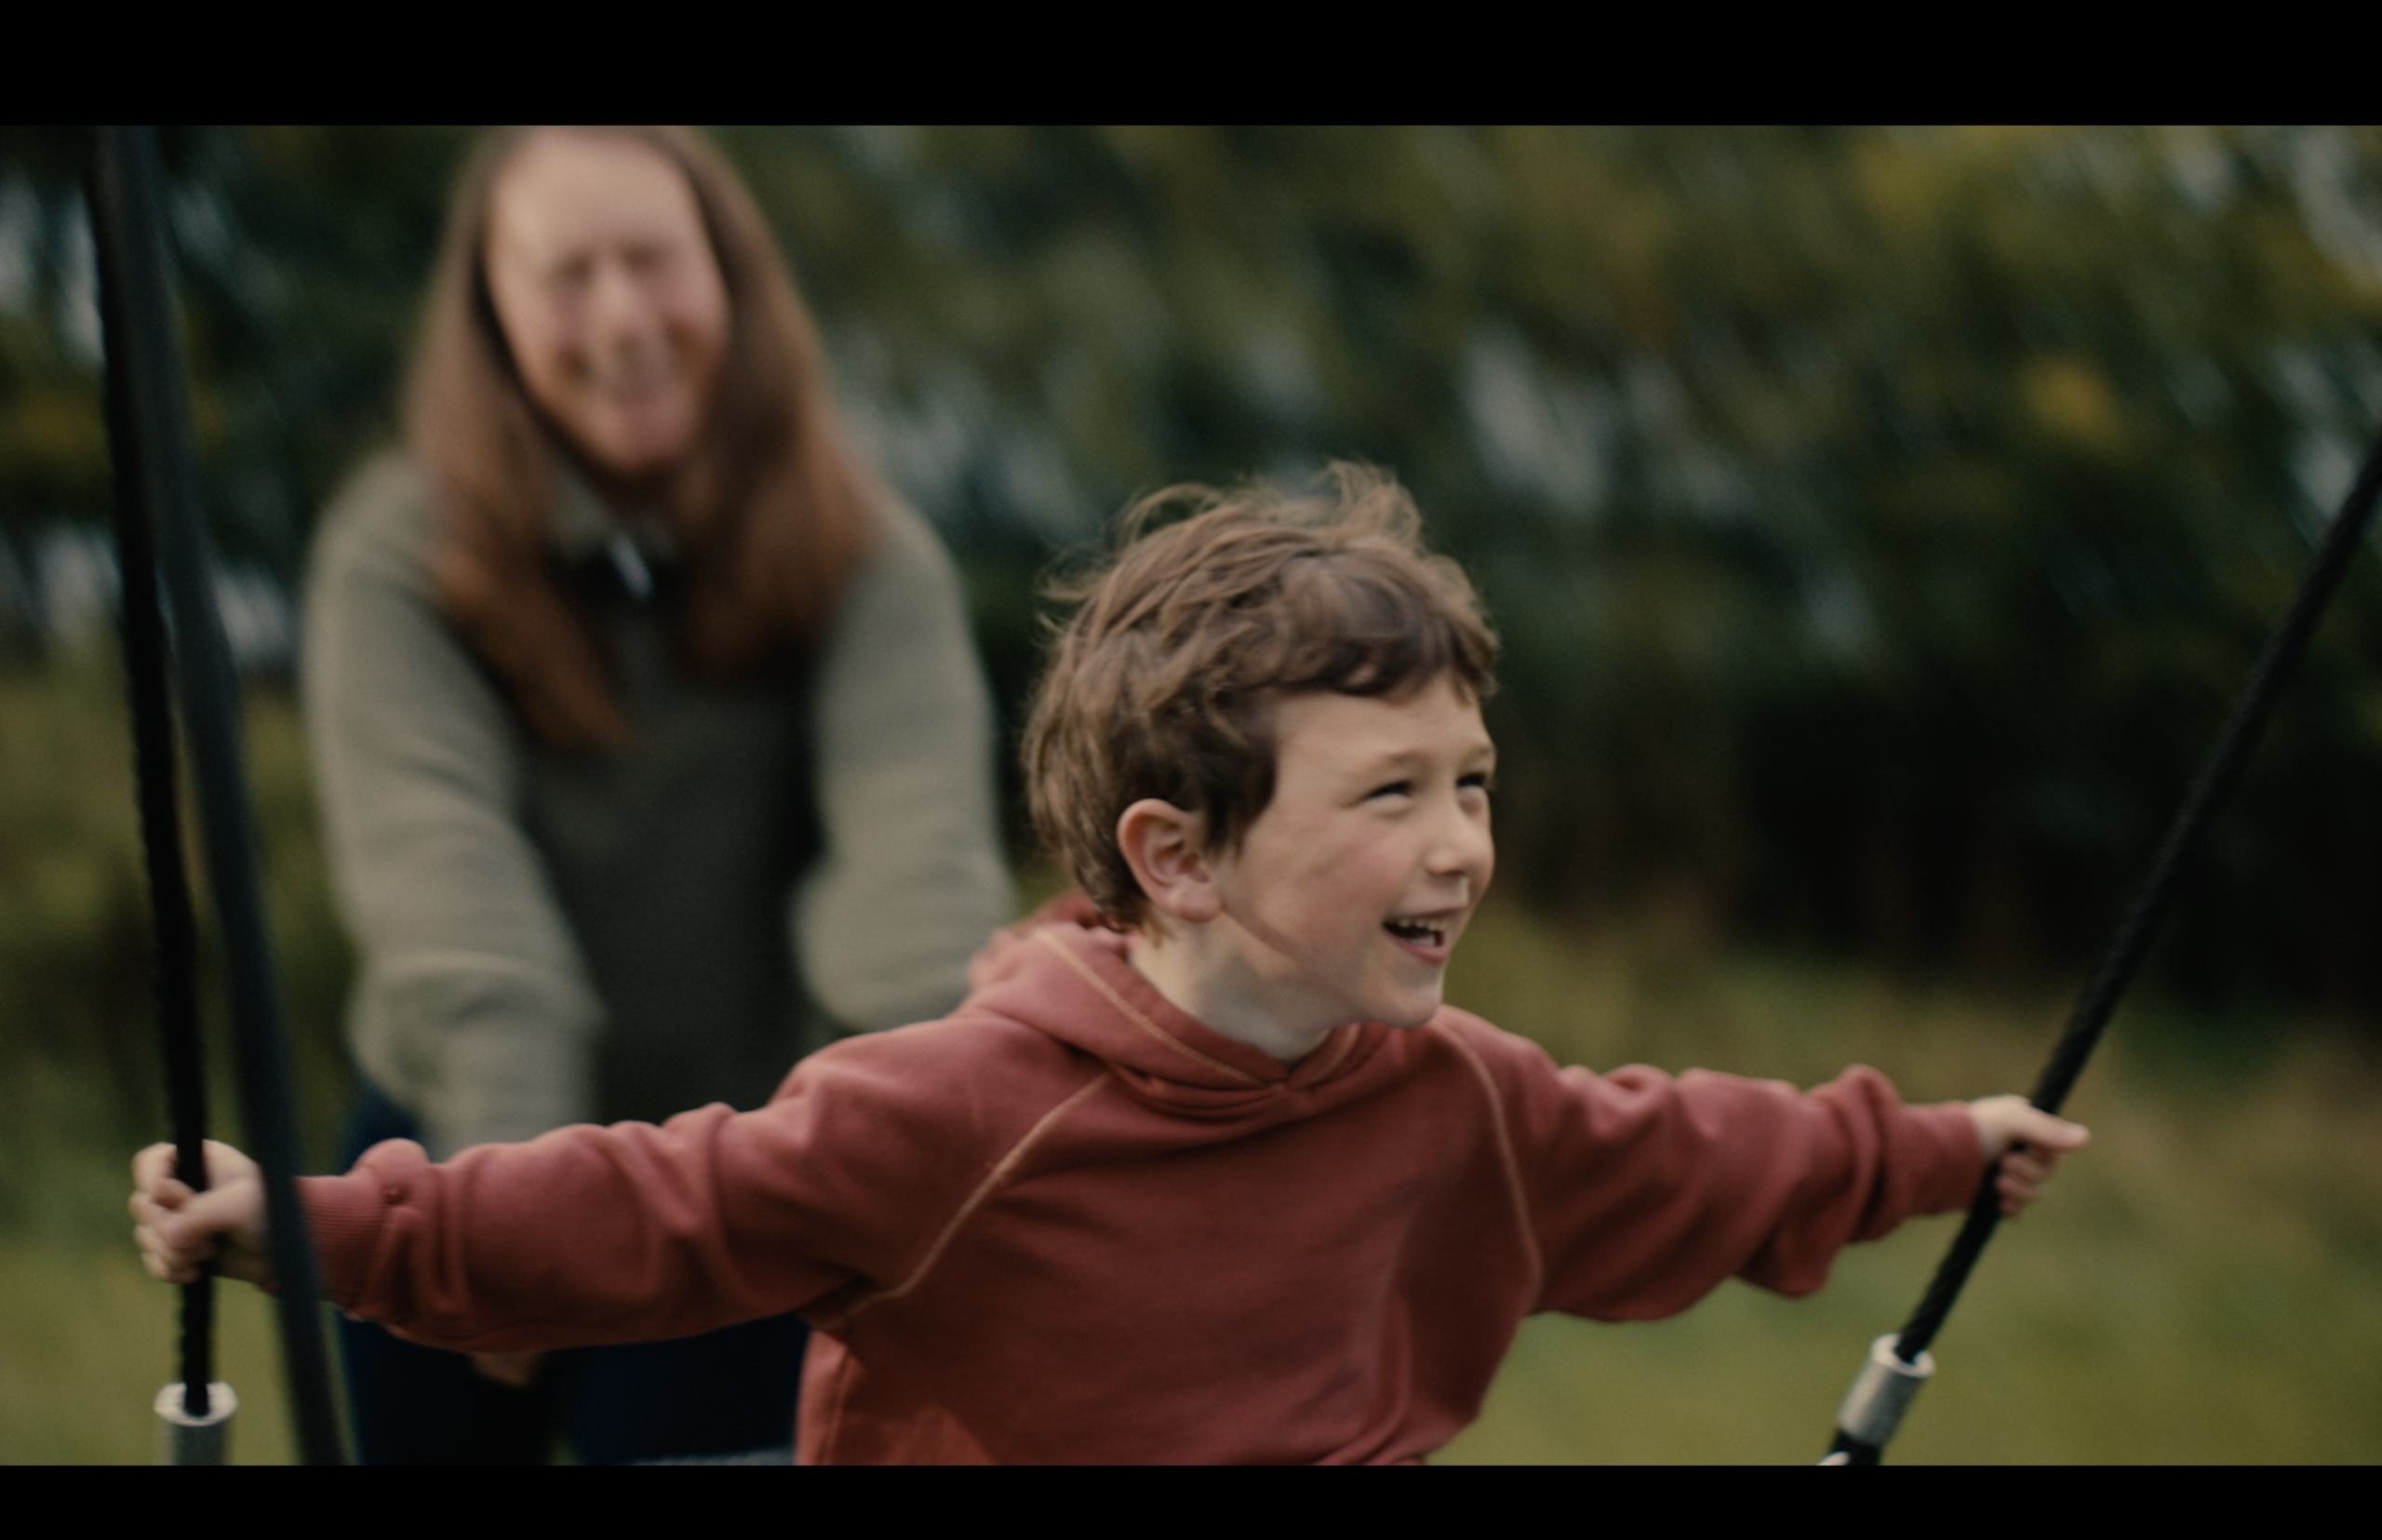 Still from CHAS TV advert featuring the playpark at Robin House hospice. A boy in a rust-coloured hoodie on an outdoor swing smiles with delight. Behind him is an adult woman with long hair who is blurred but you can still see the smile on her face too.